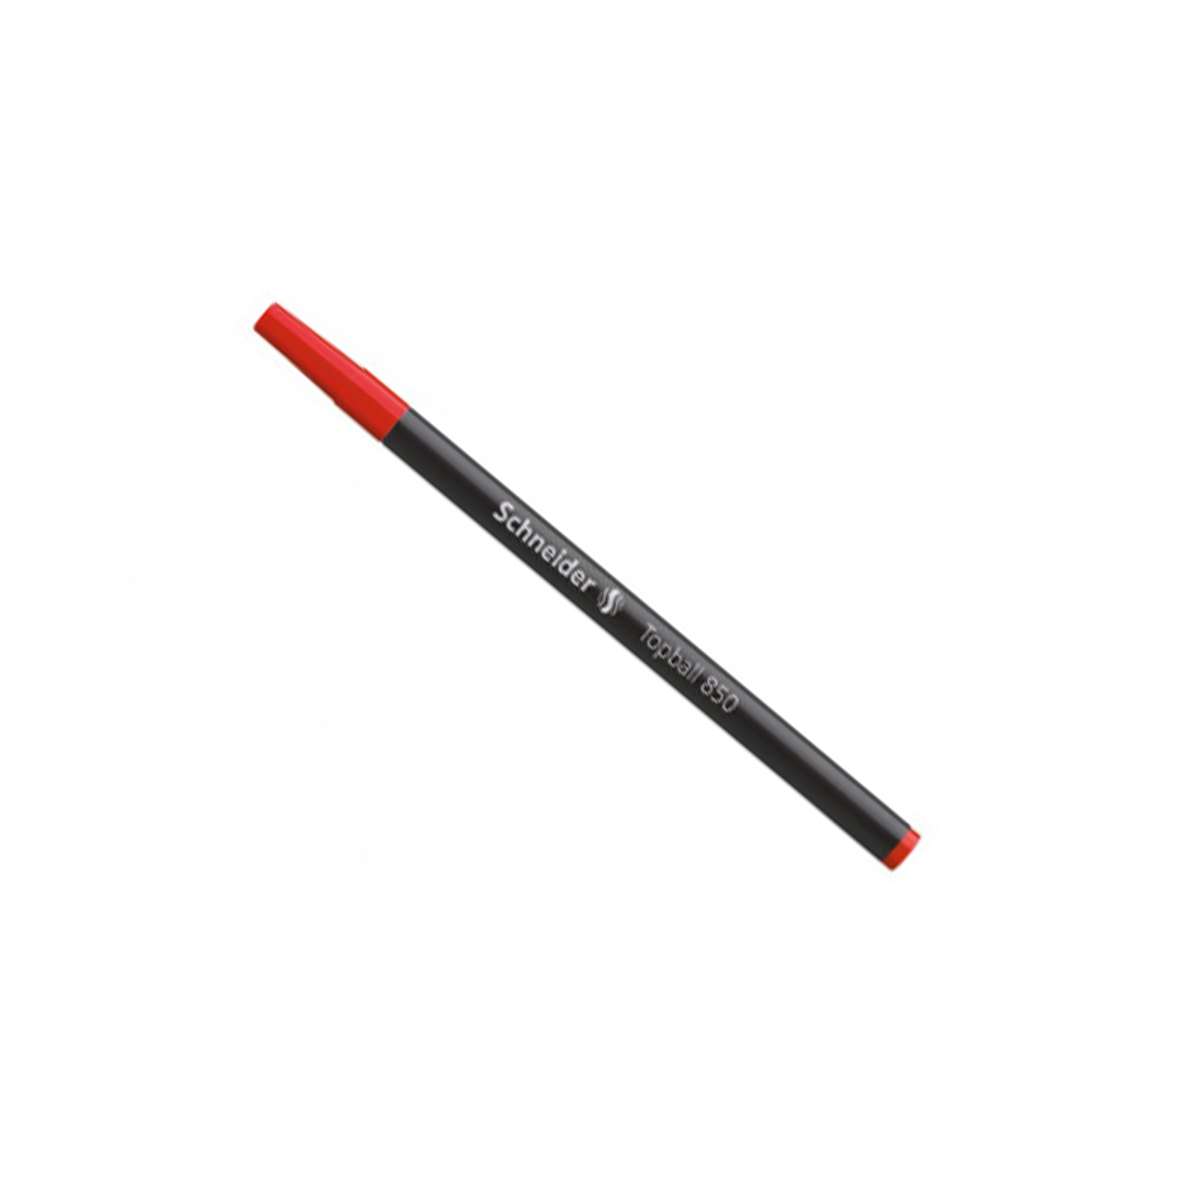 schneider Topball 850 : Model 71609 red color Writing Roller Ball